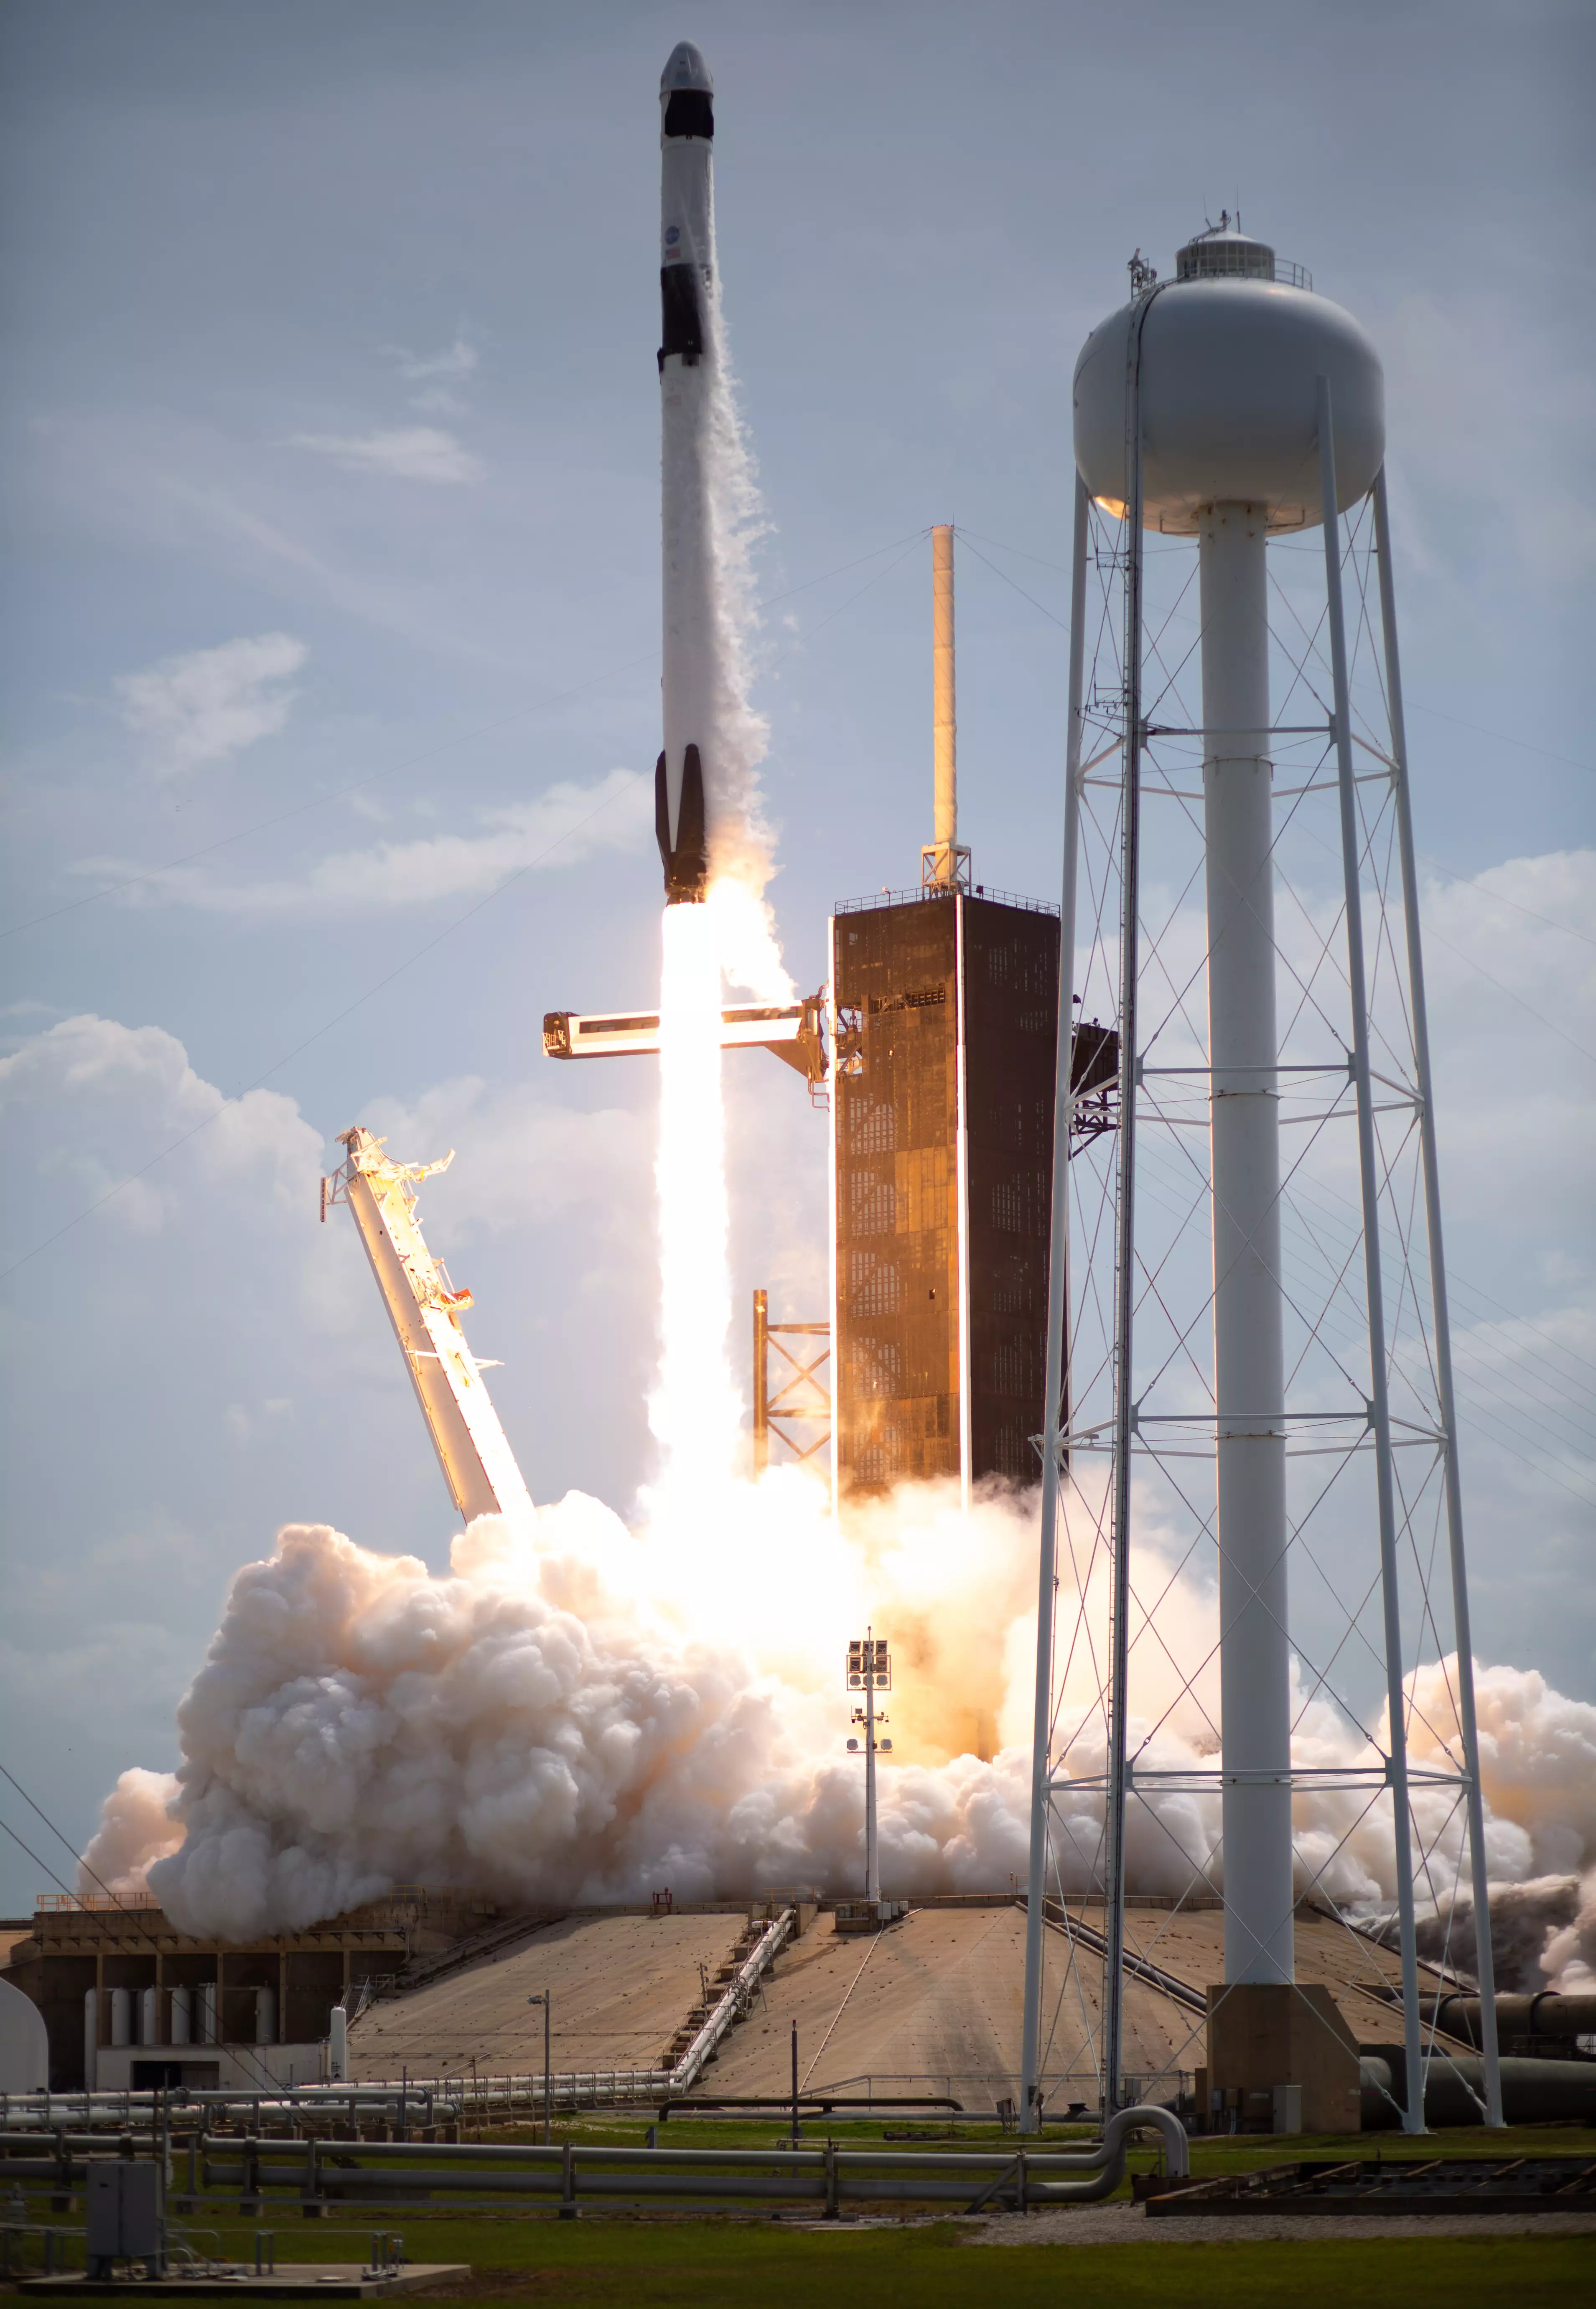 The SpaceX shuttle successfully launched yesterday (30 May).